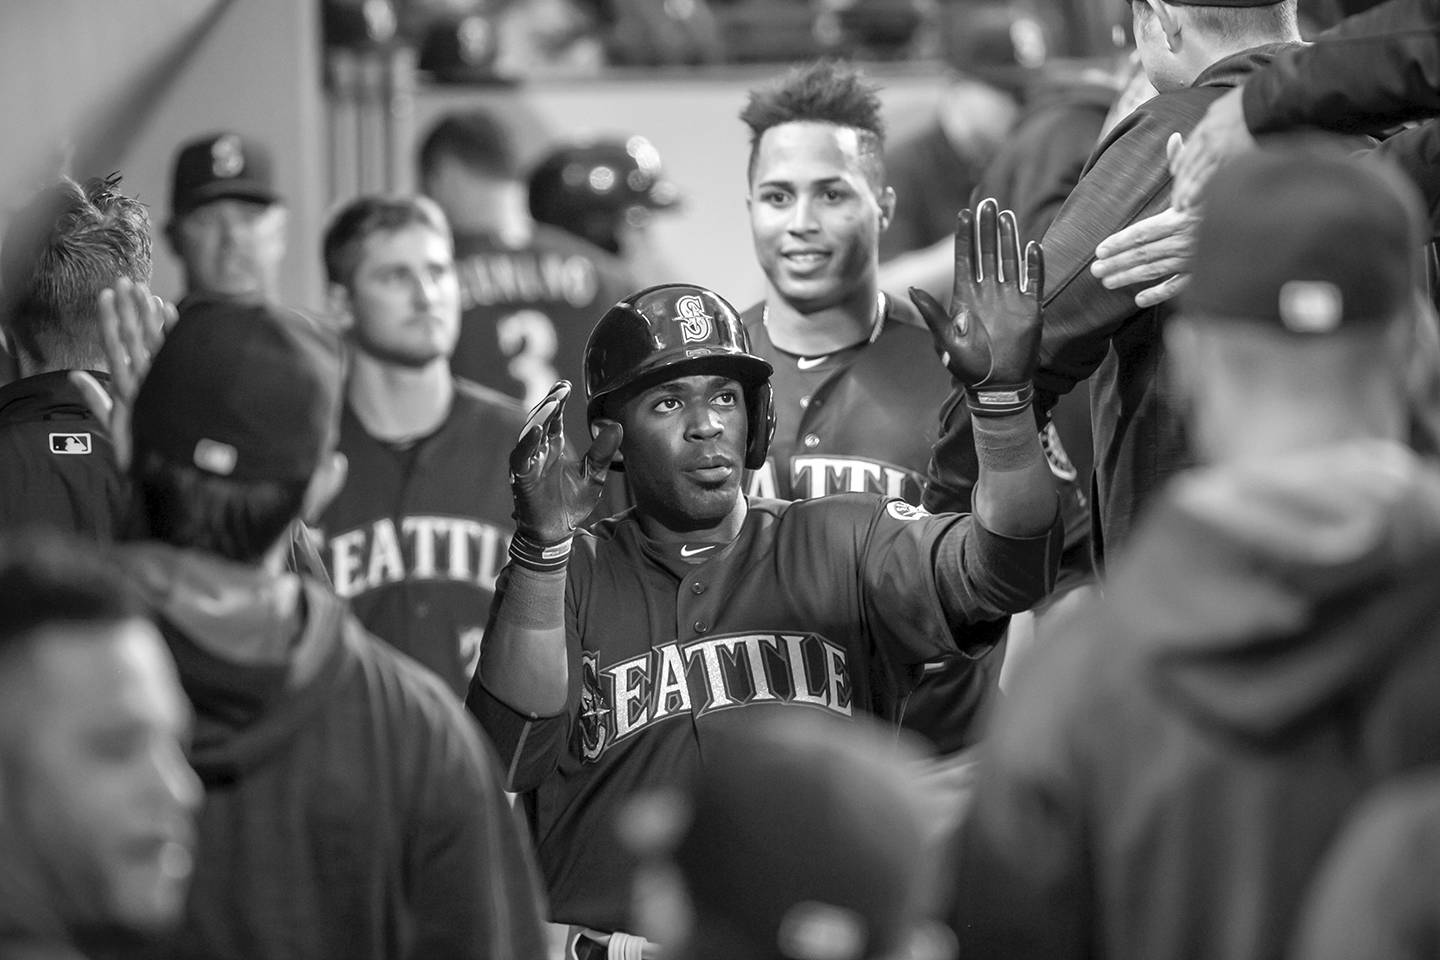 A more comfortable Guillermo Heredia is ready to grab a spot on the Mariners’ opening day roster